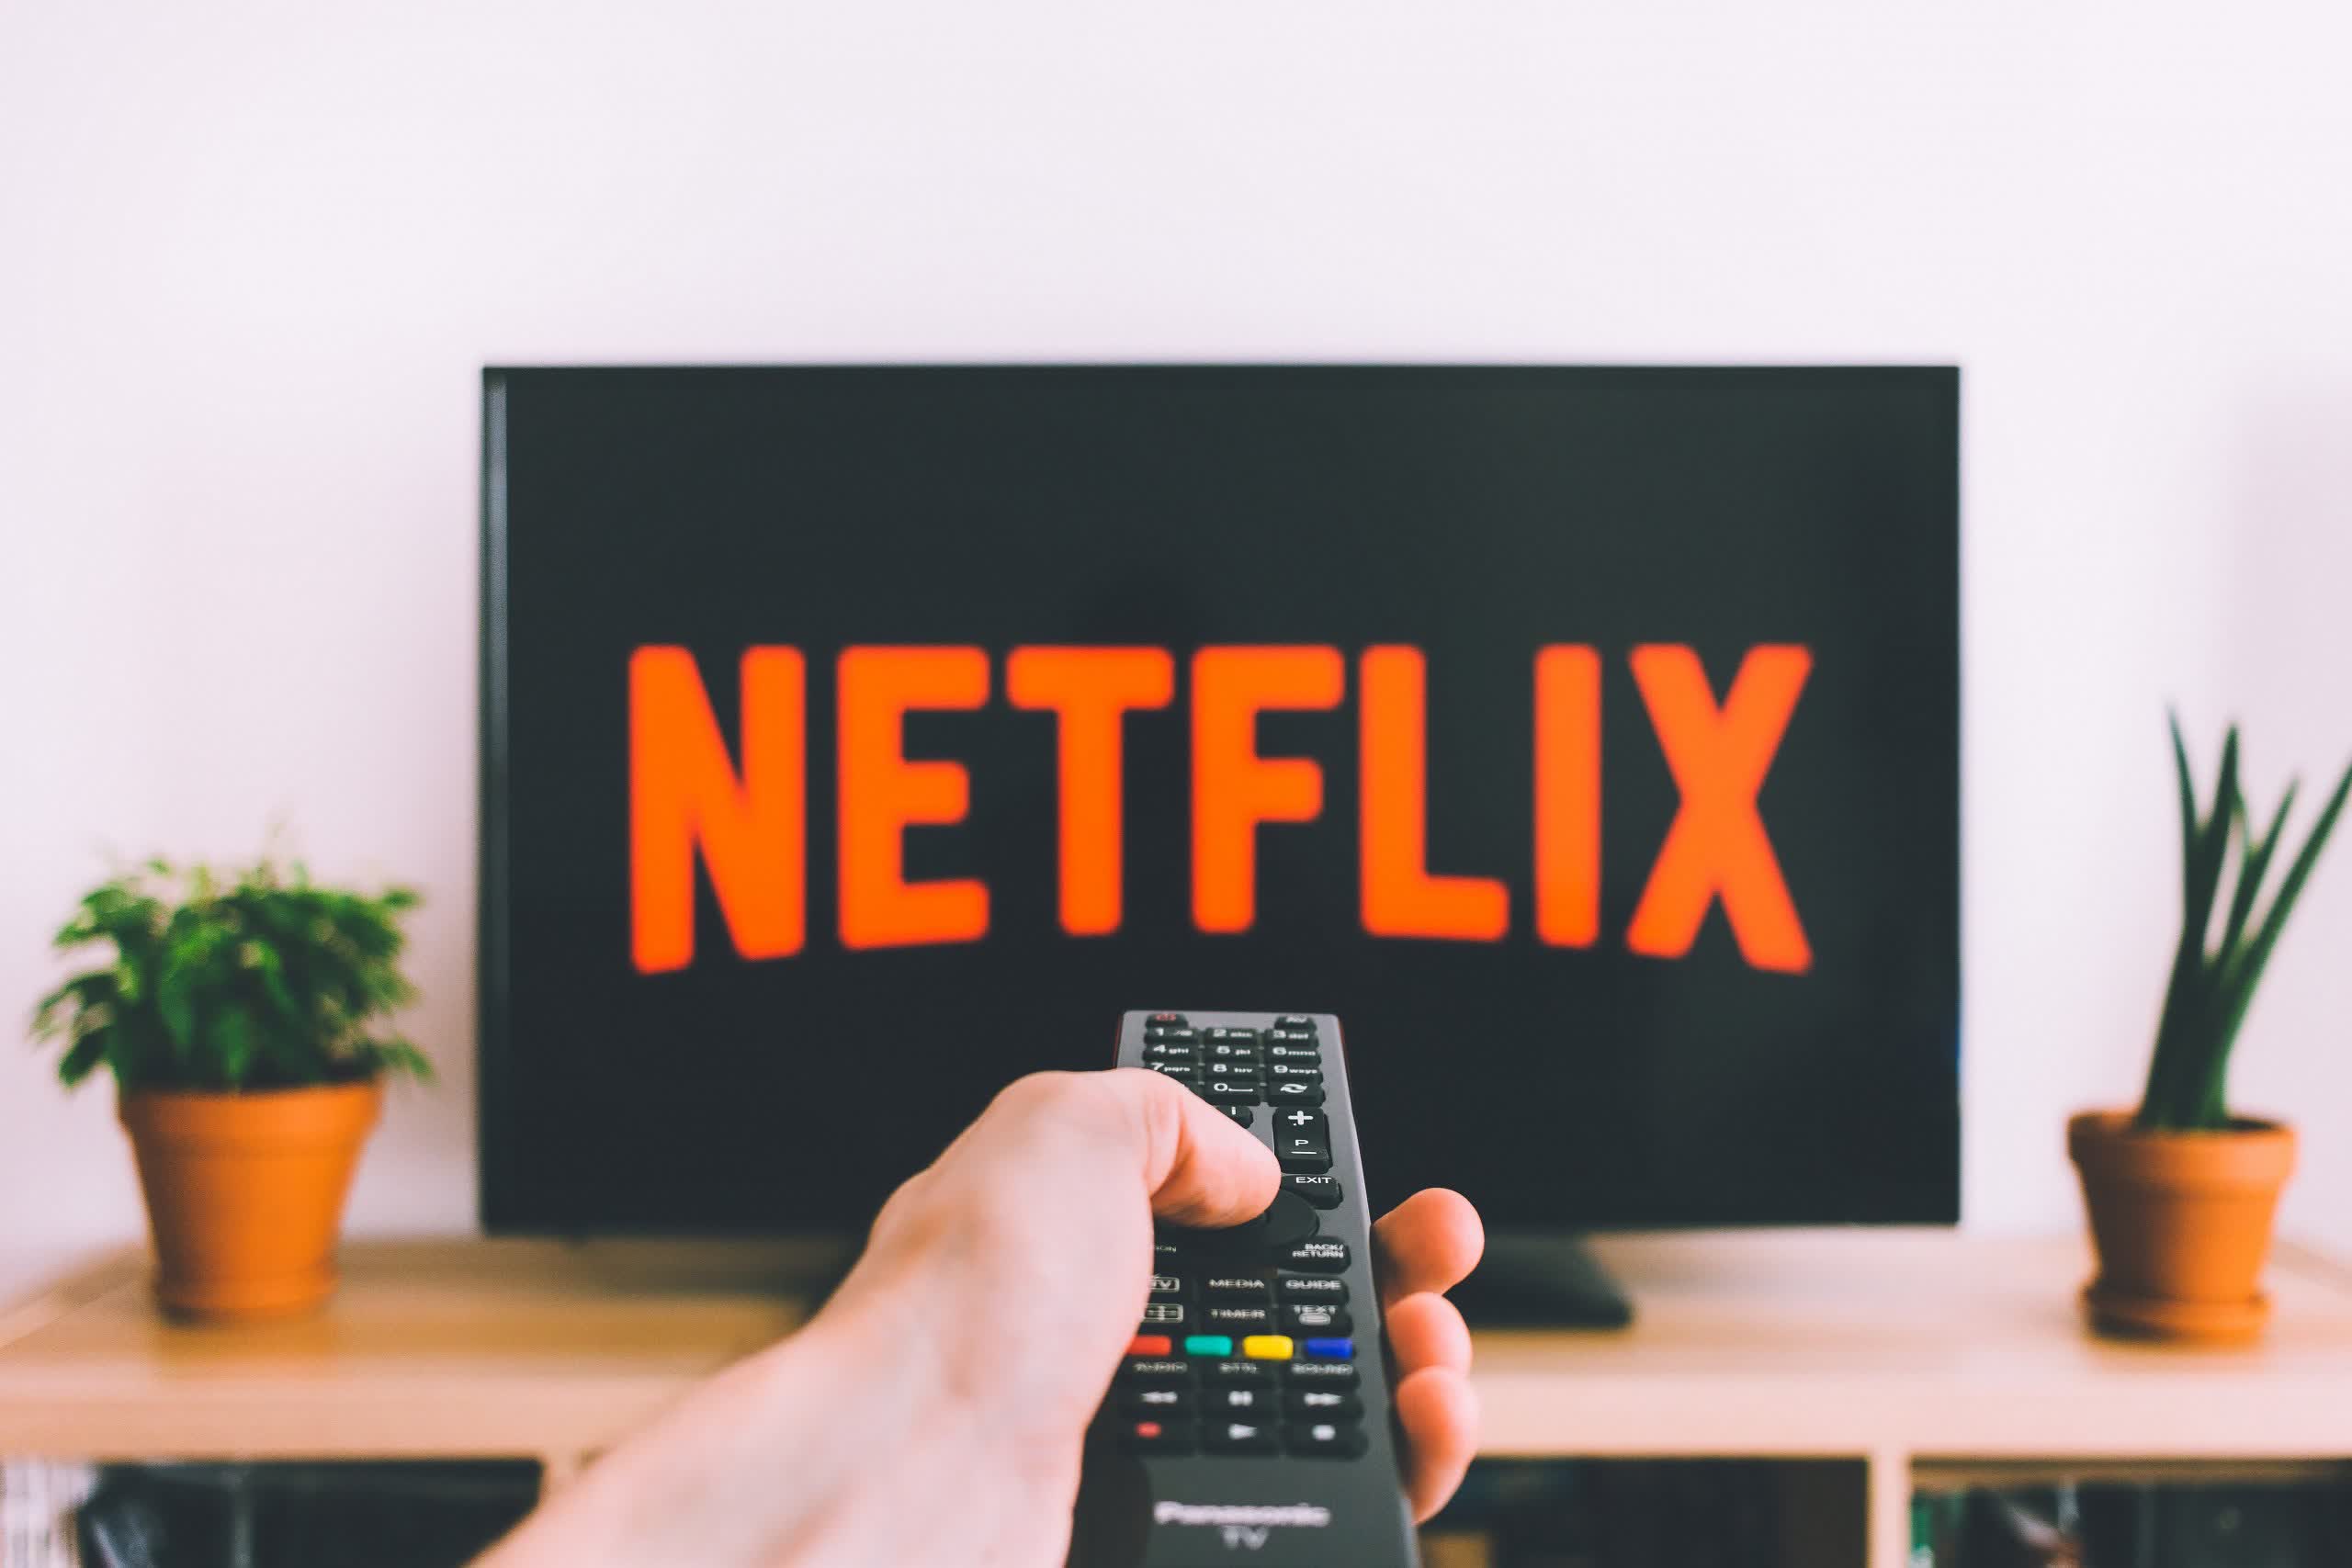 Netflix wrapped up Q2 with over 209 million subscribers, but still missed on earnings